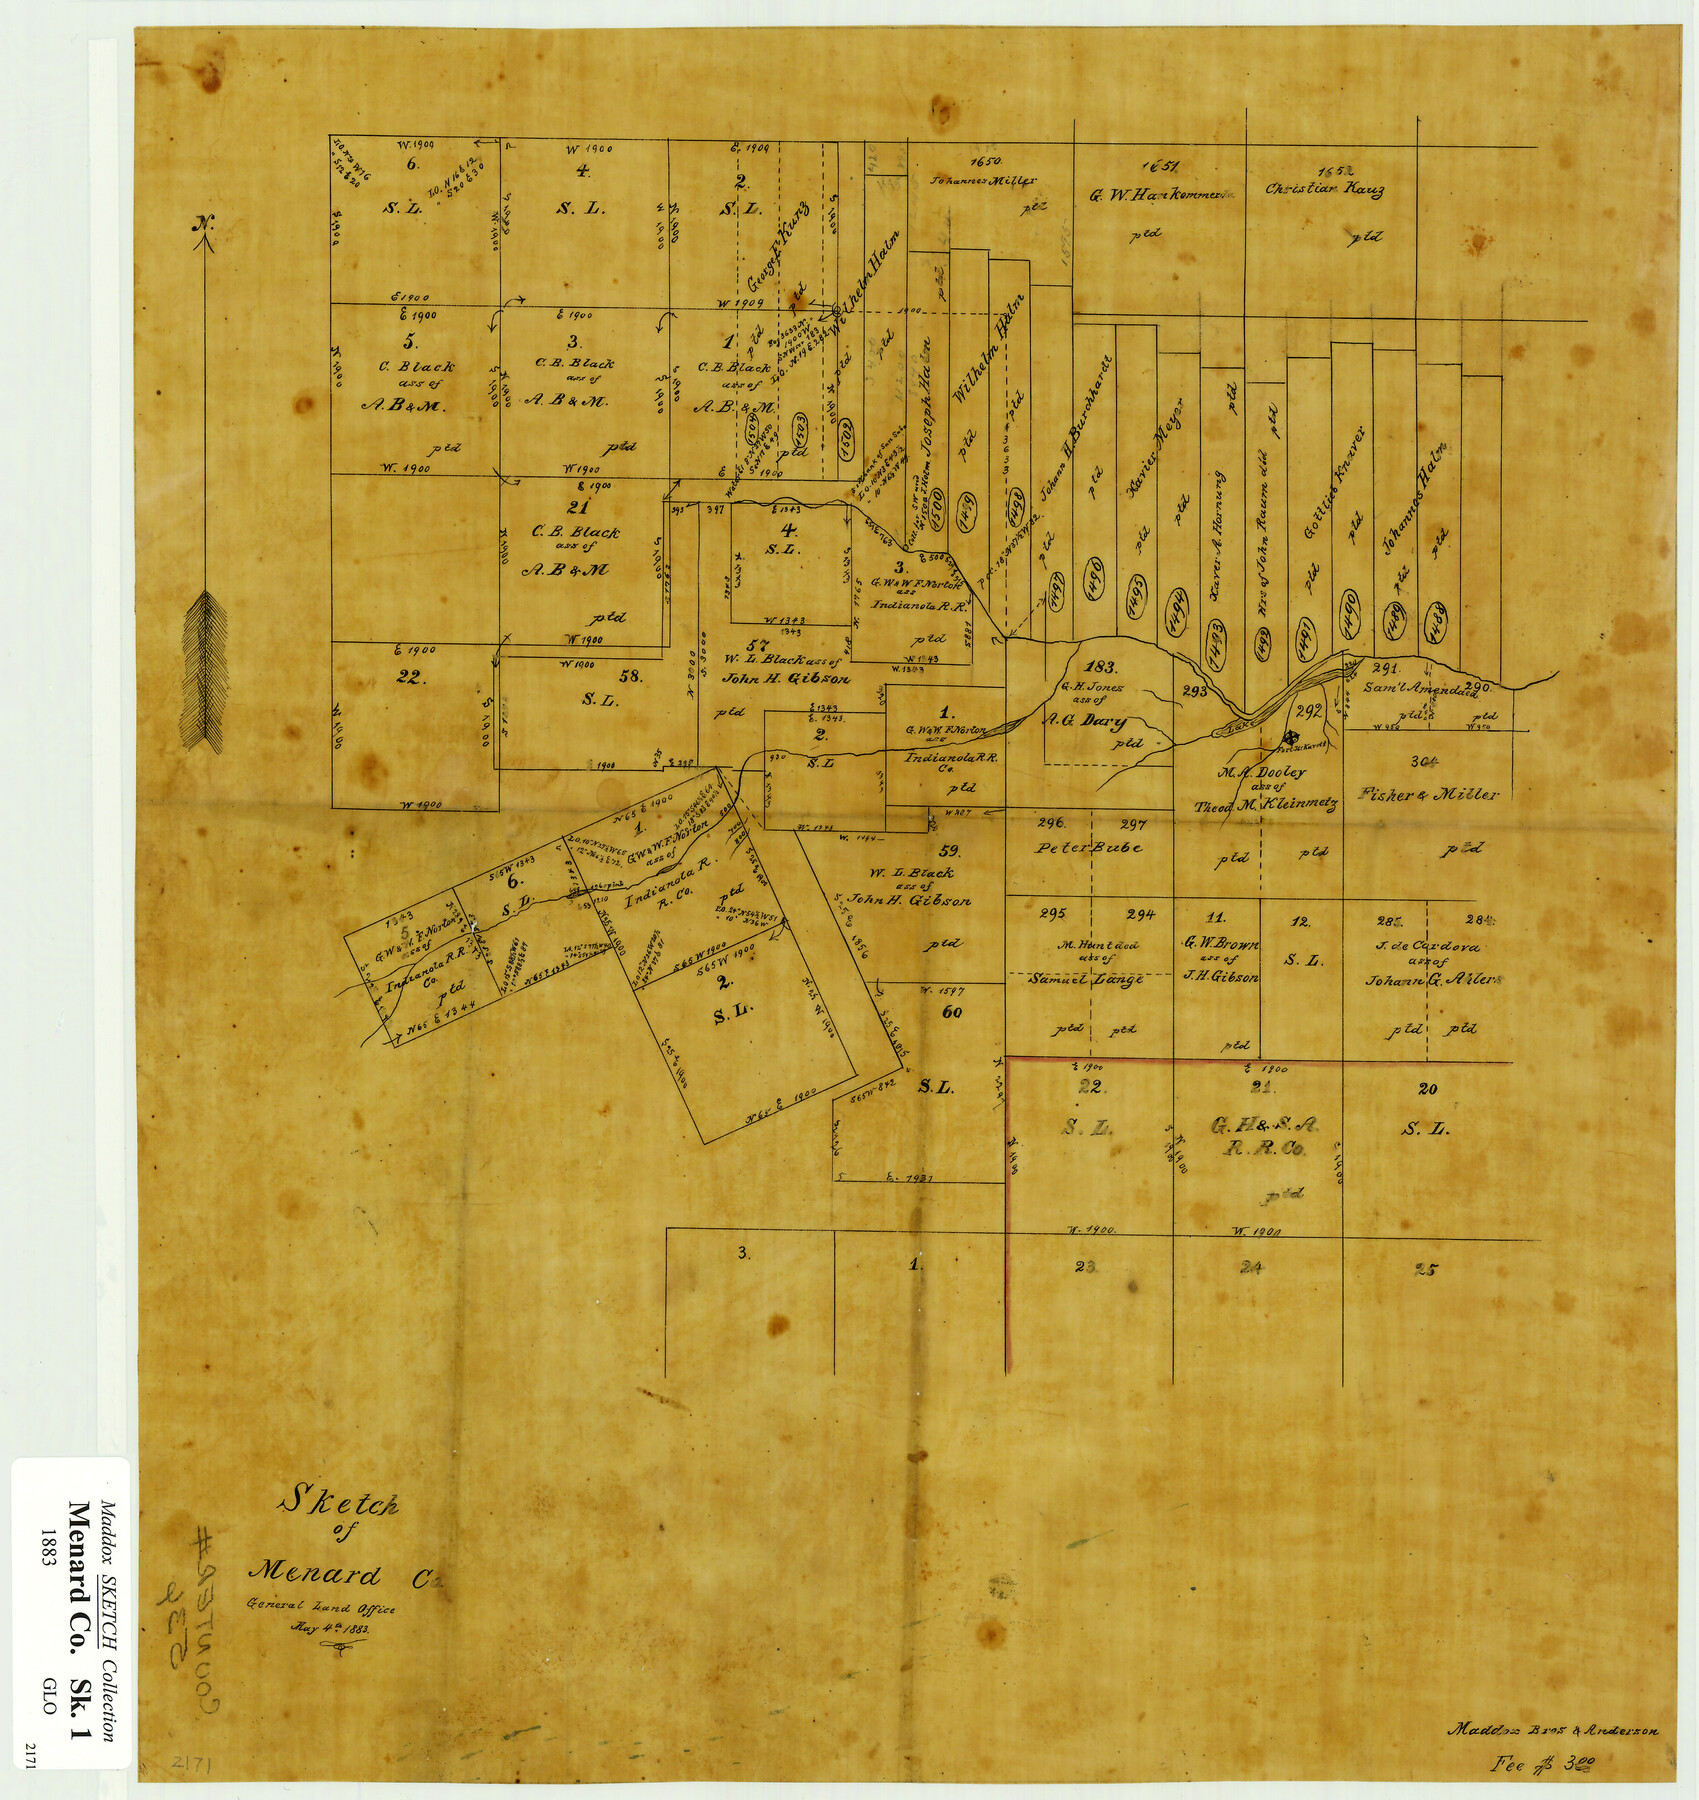 536, Sketch of Menard Co., Maddox Collection